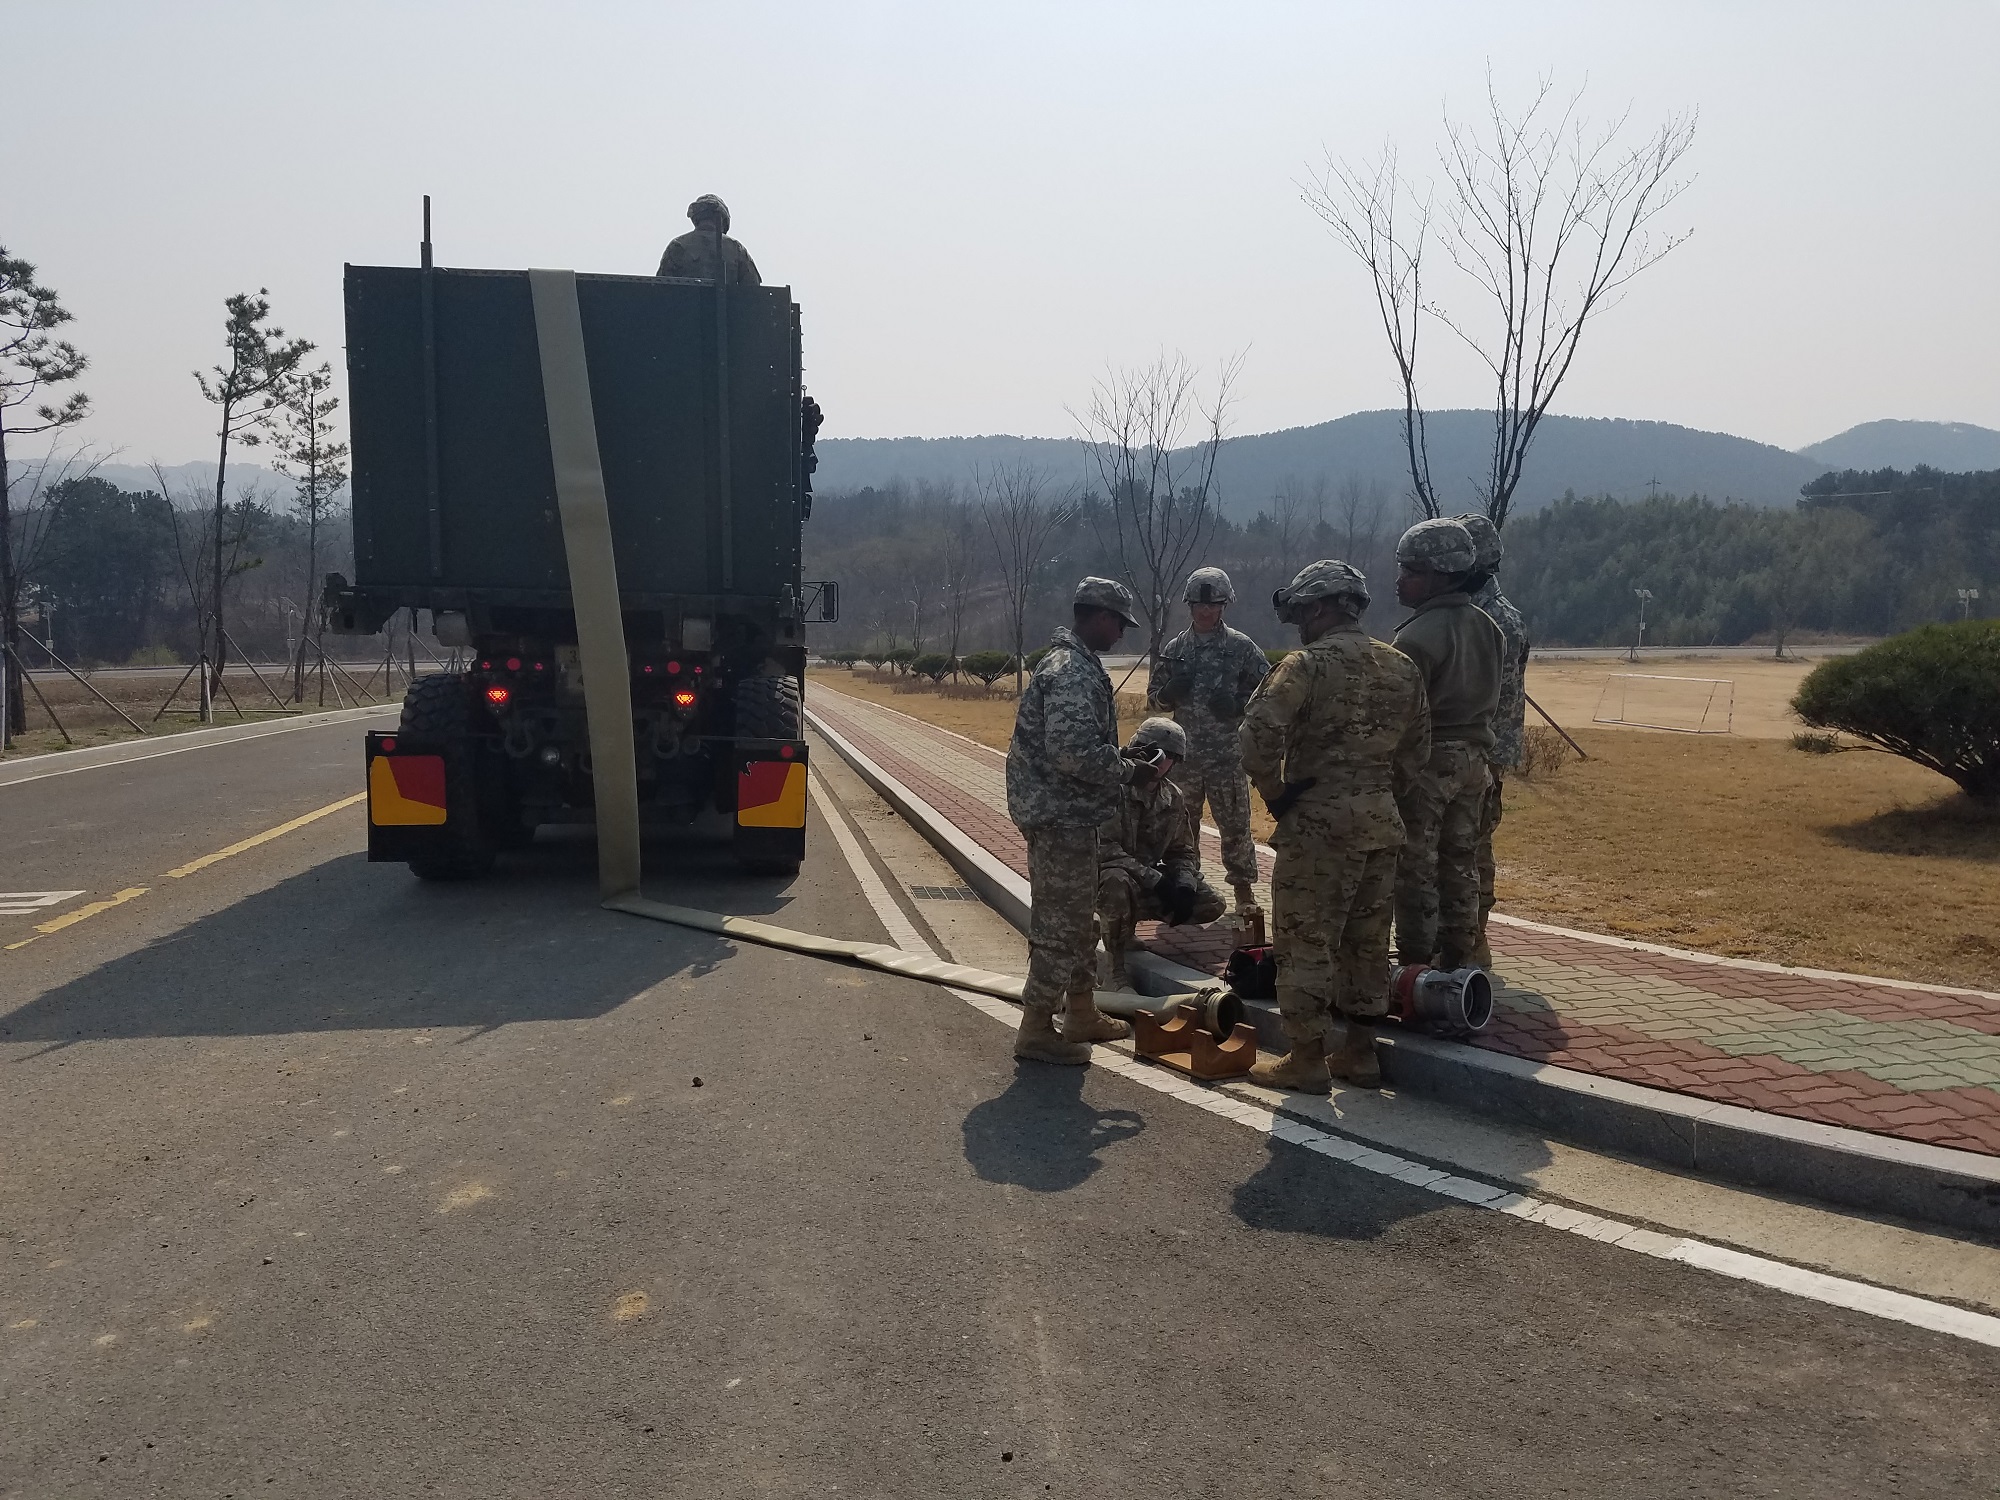 Soldiers from the 339th Quartermaster Company and the 498th Combat Service Support Battalion used existing culverts to thread 9,500 feet of lay-flat hose though pipes during the Combined Joint Logistics Over-the-Shore exercise at Pohang, South Korea, last spring. The hose is part of the Fight Tonight Emergency Fuel Distribution System, which can deliver 720,000 gallons of fuel per day. (U.S. Army photo by Drew Downing, RDECOM)